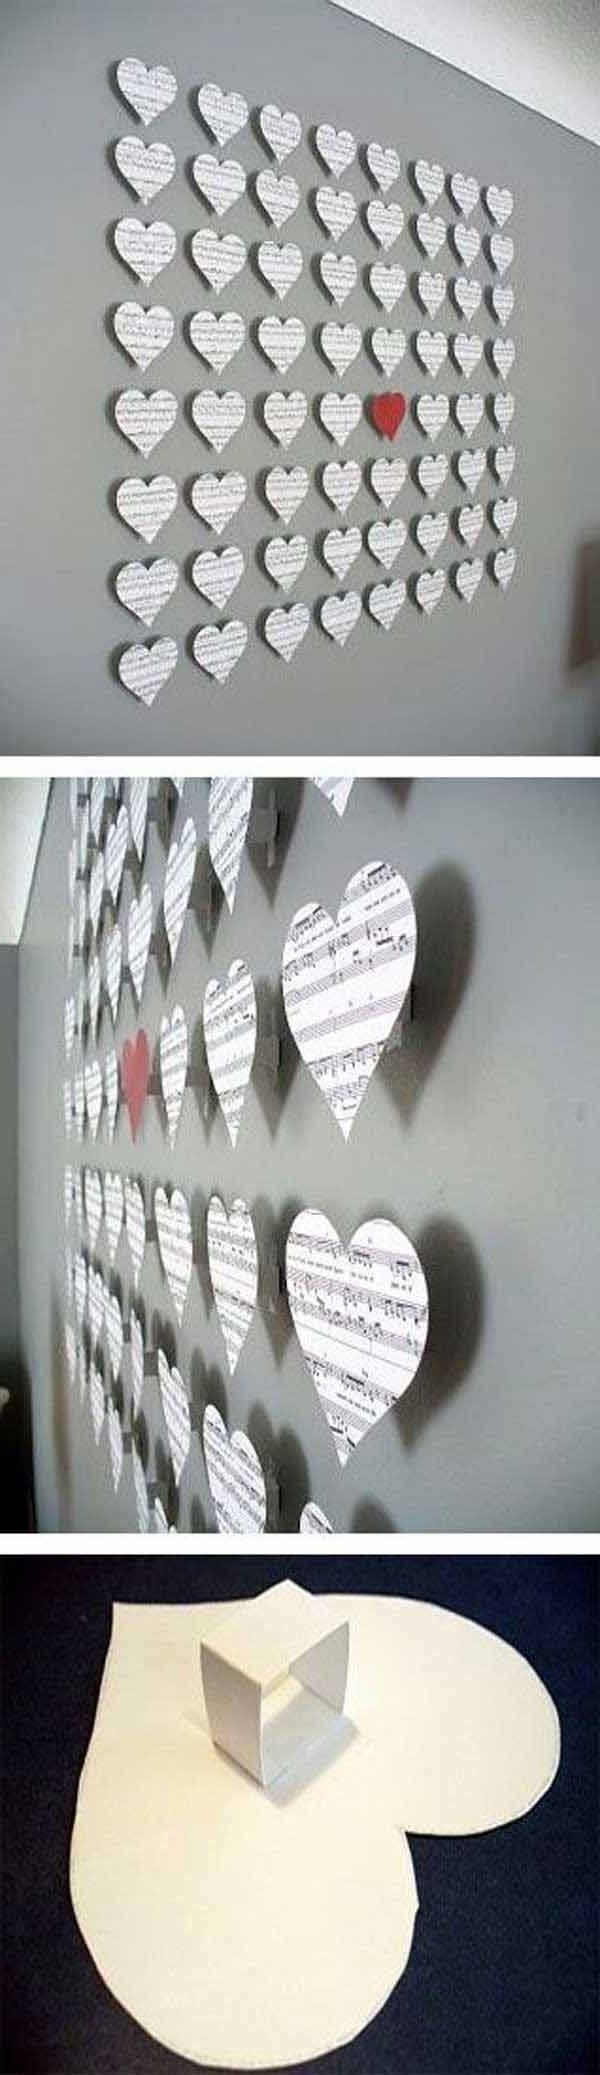 Cheap Wall Art And Decor Throughout Preferred Best 25+ Diy Wall Decor Ideas On Pinterest (View 12 of 15)